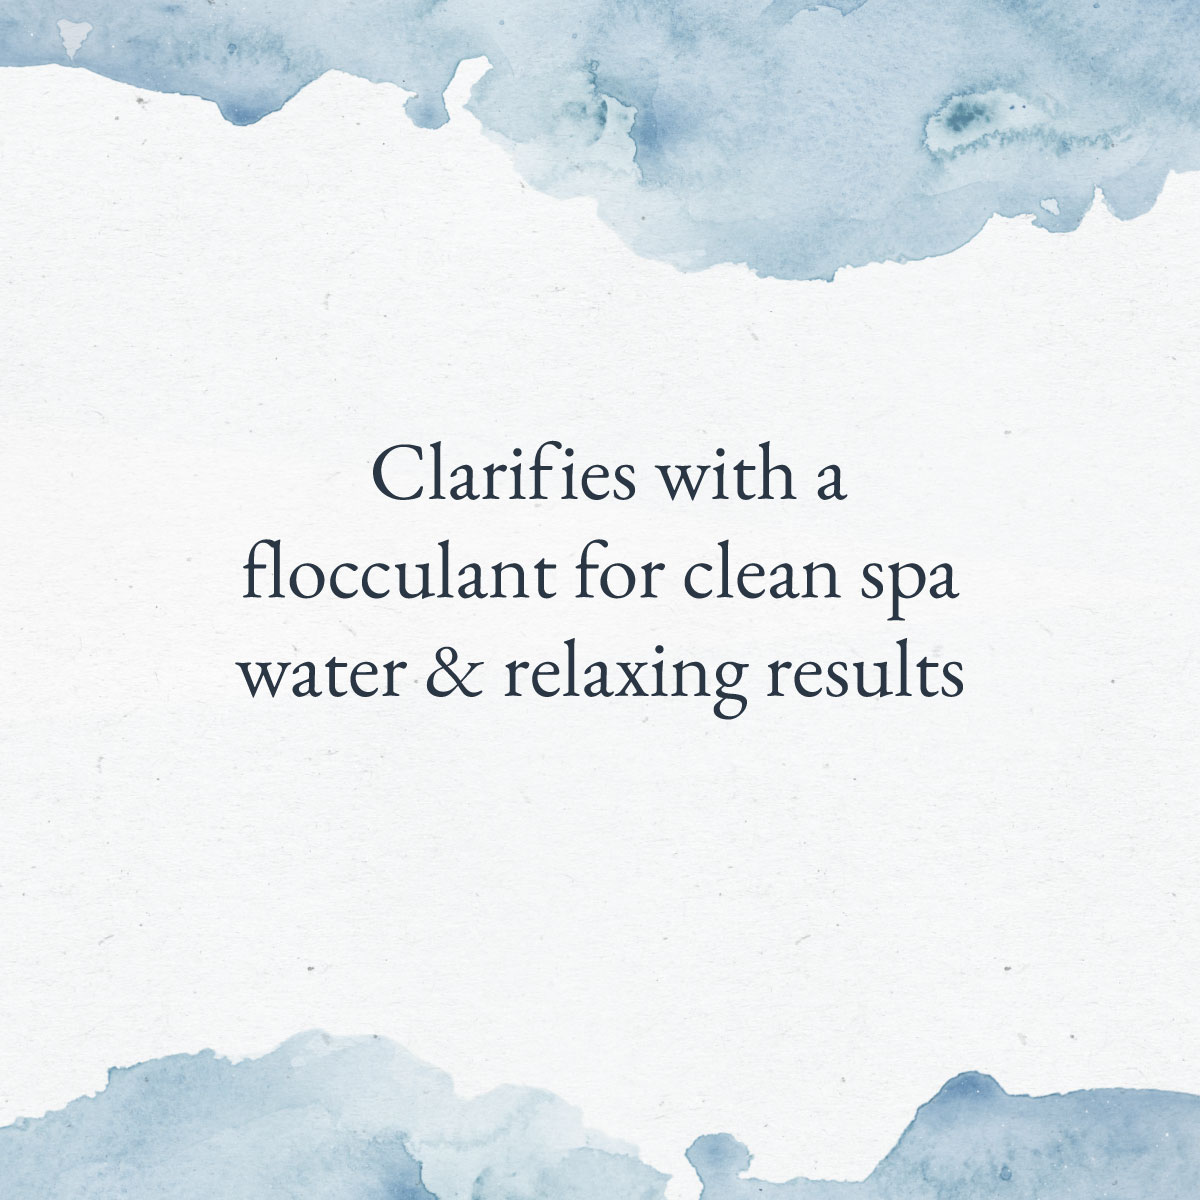 Clarifies with a flocculant for clean spa water & relaxing results